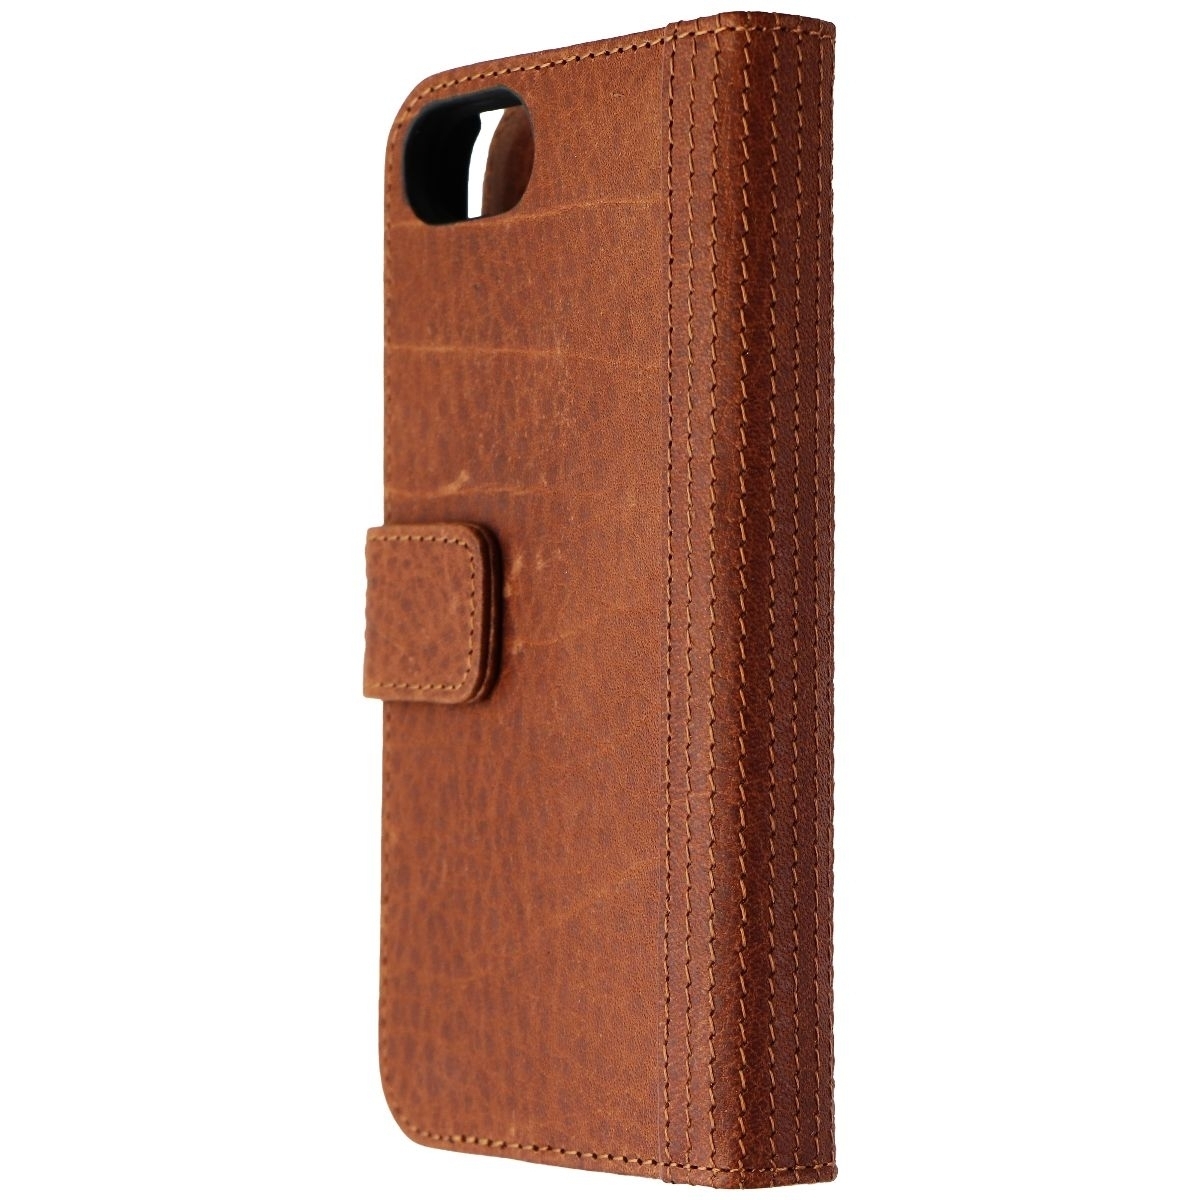 Decoded Full Grain 2-in-1 Leather Case For IPhone 8/7/6s/6 - Brown (Refurbished)